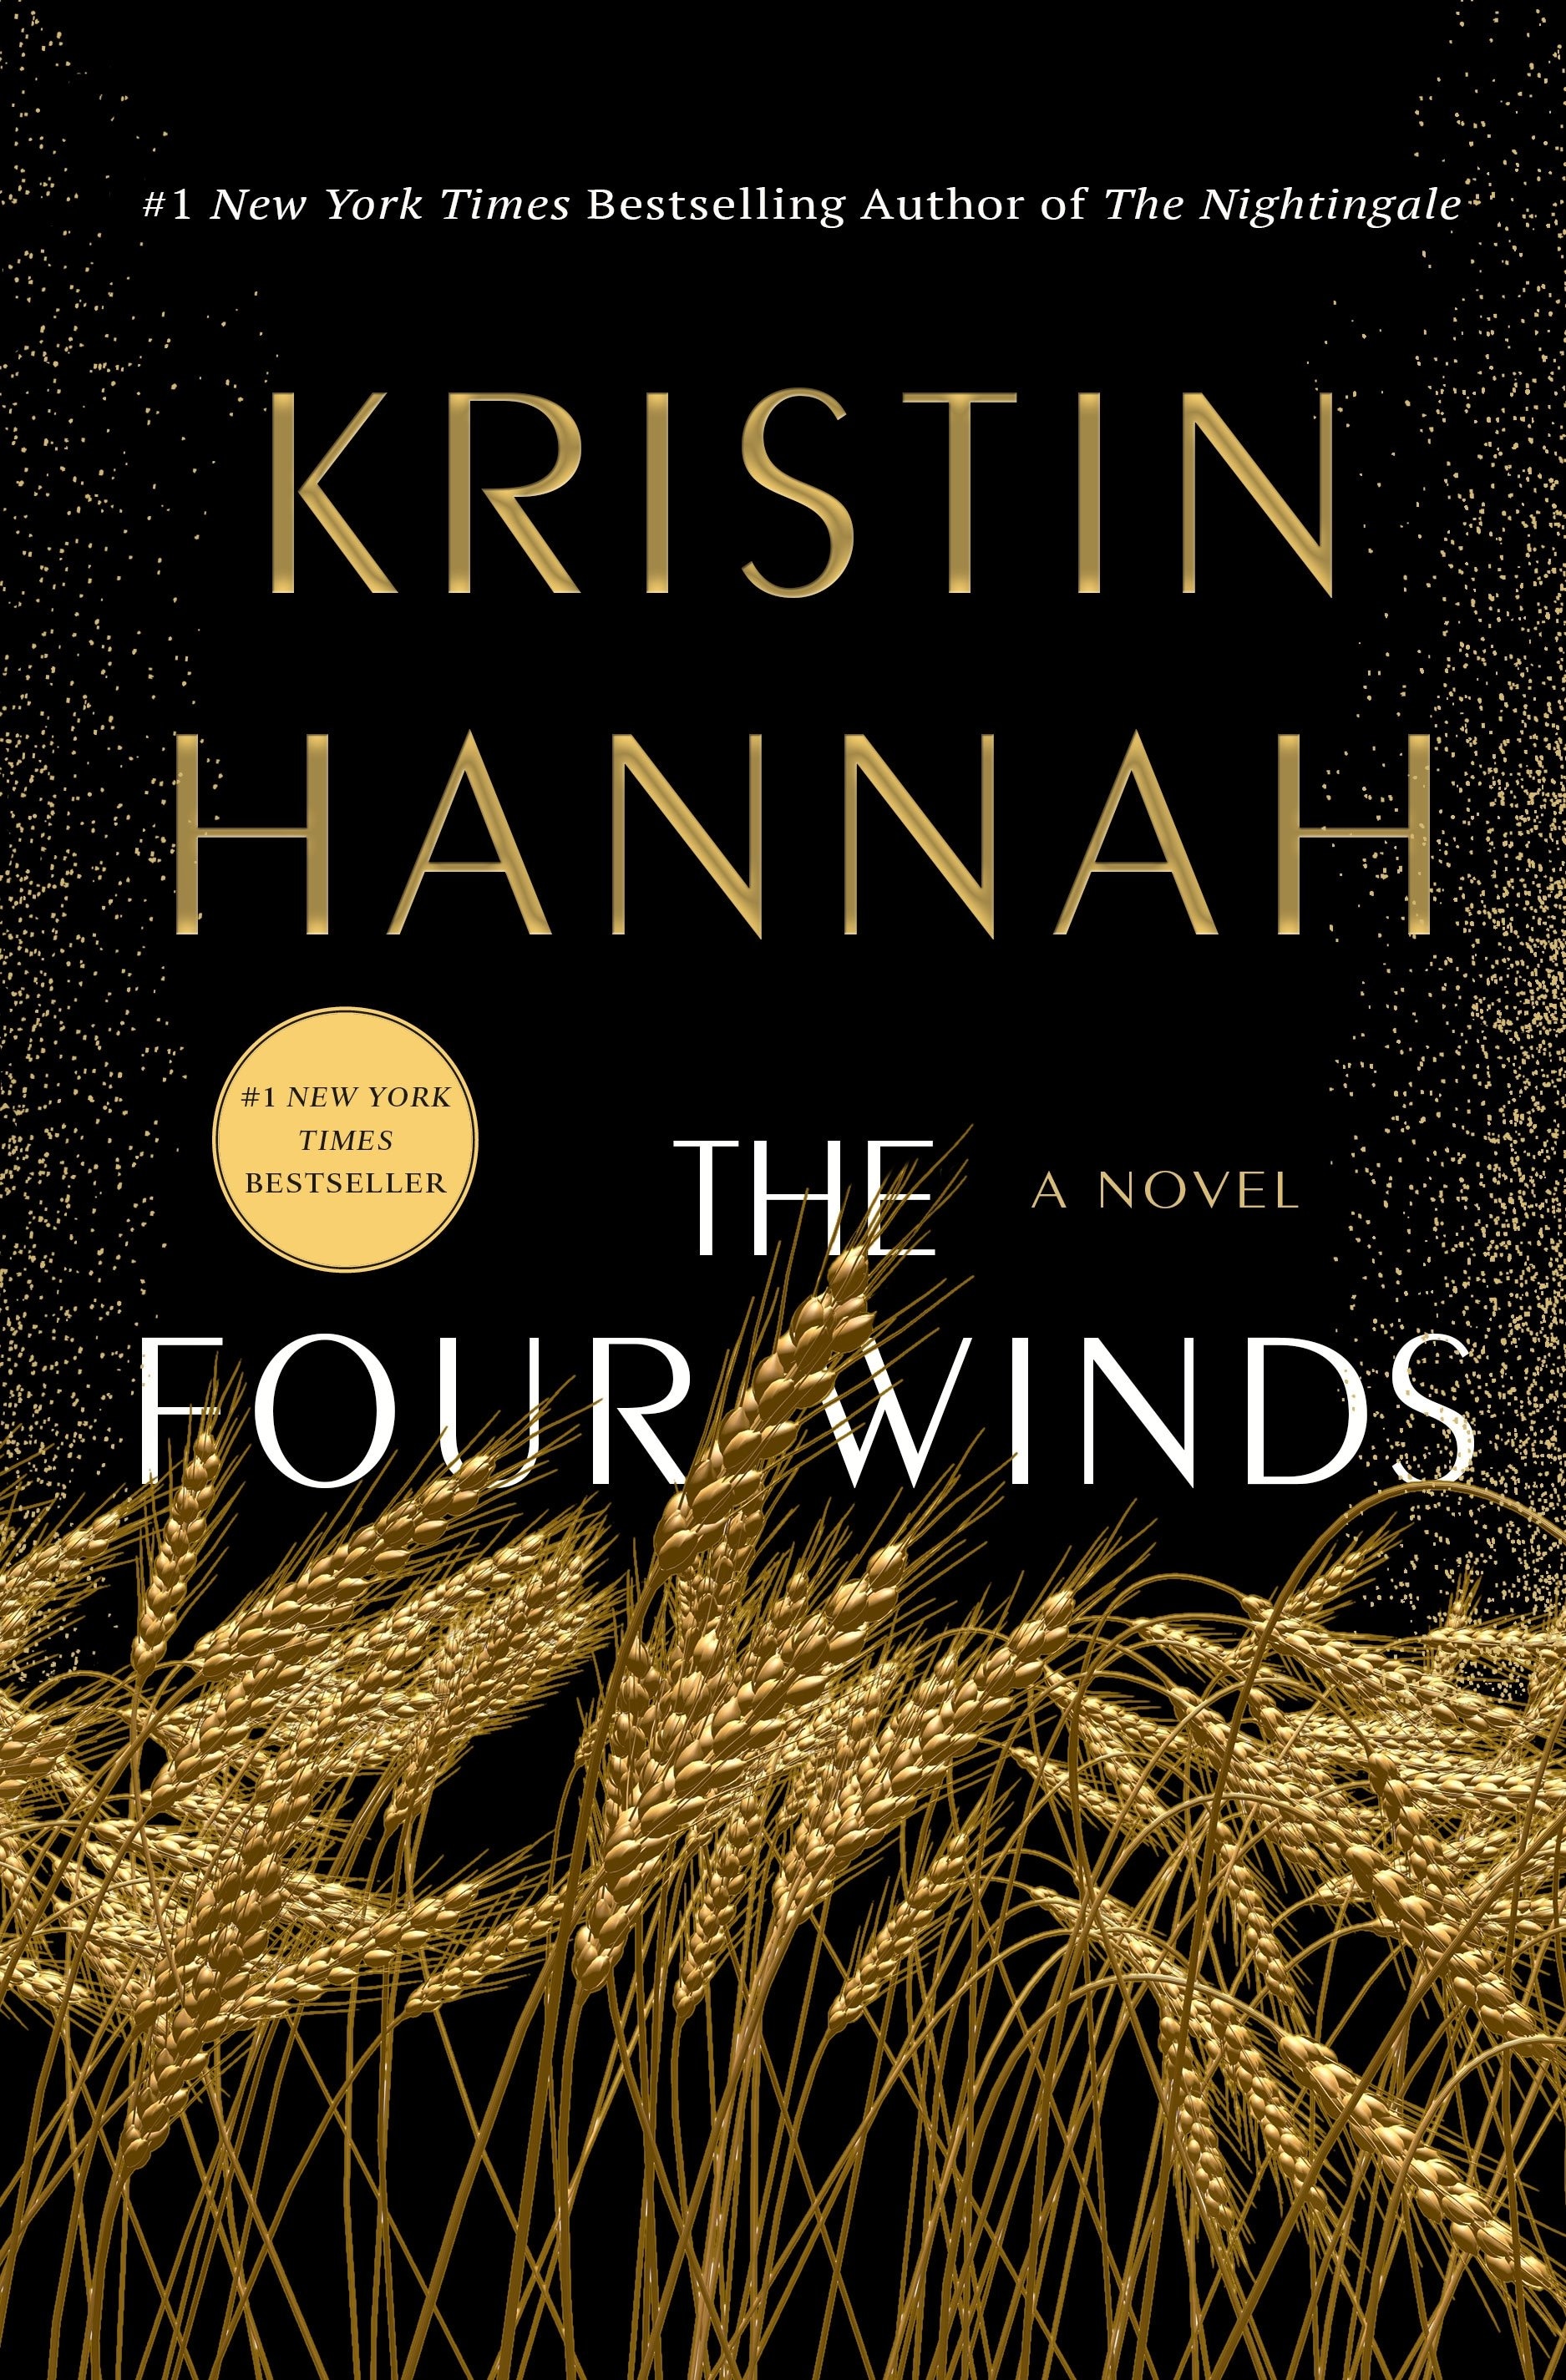 Book “The Four Winds” by Kristin Hannah — February 2, 2021